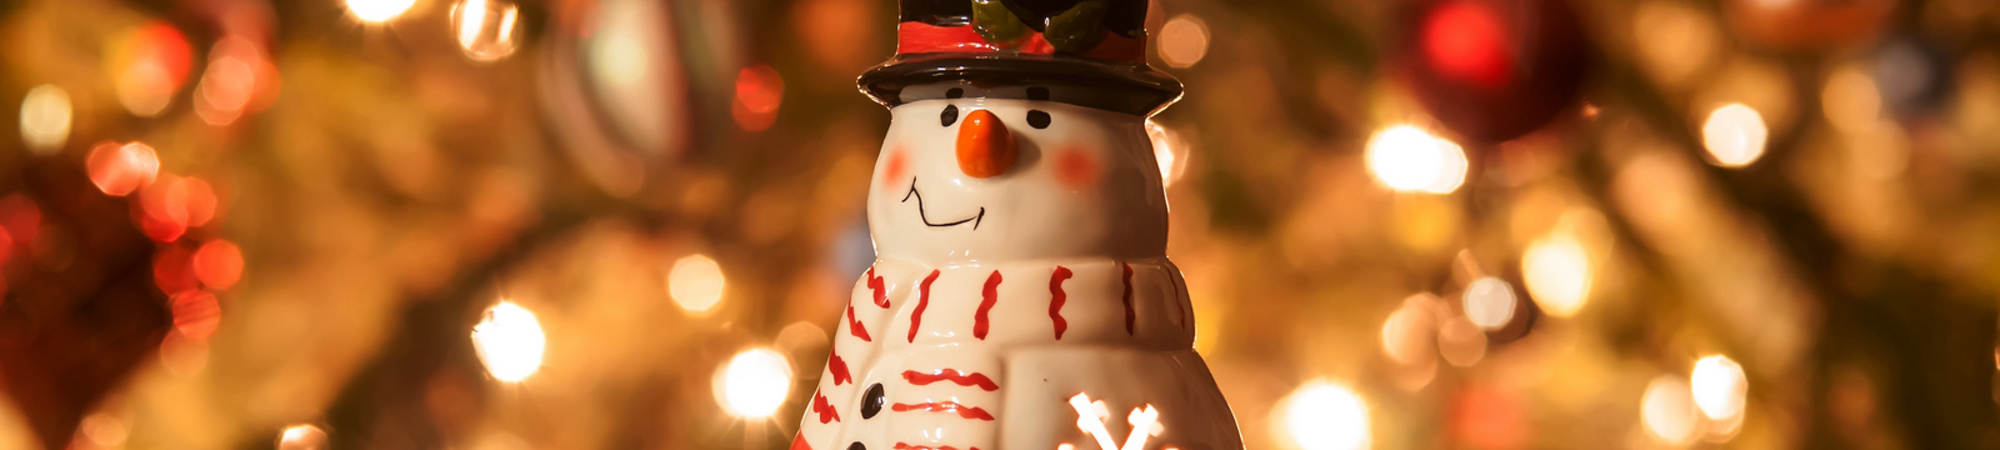 Christmas Candle Snowman With Lights